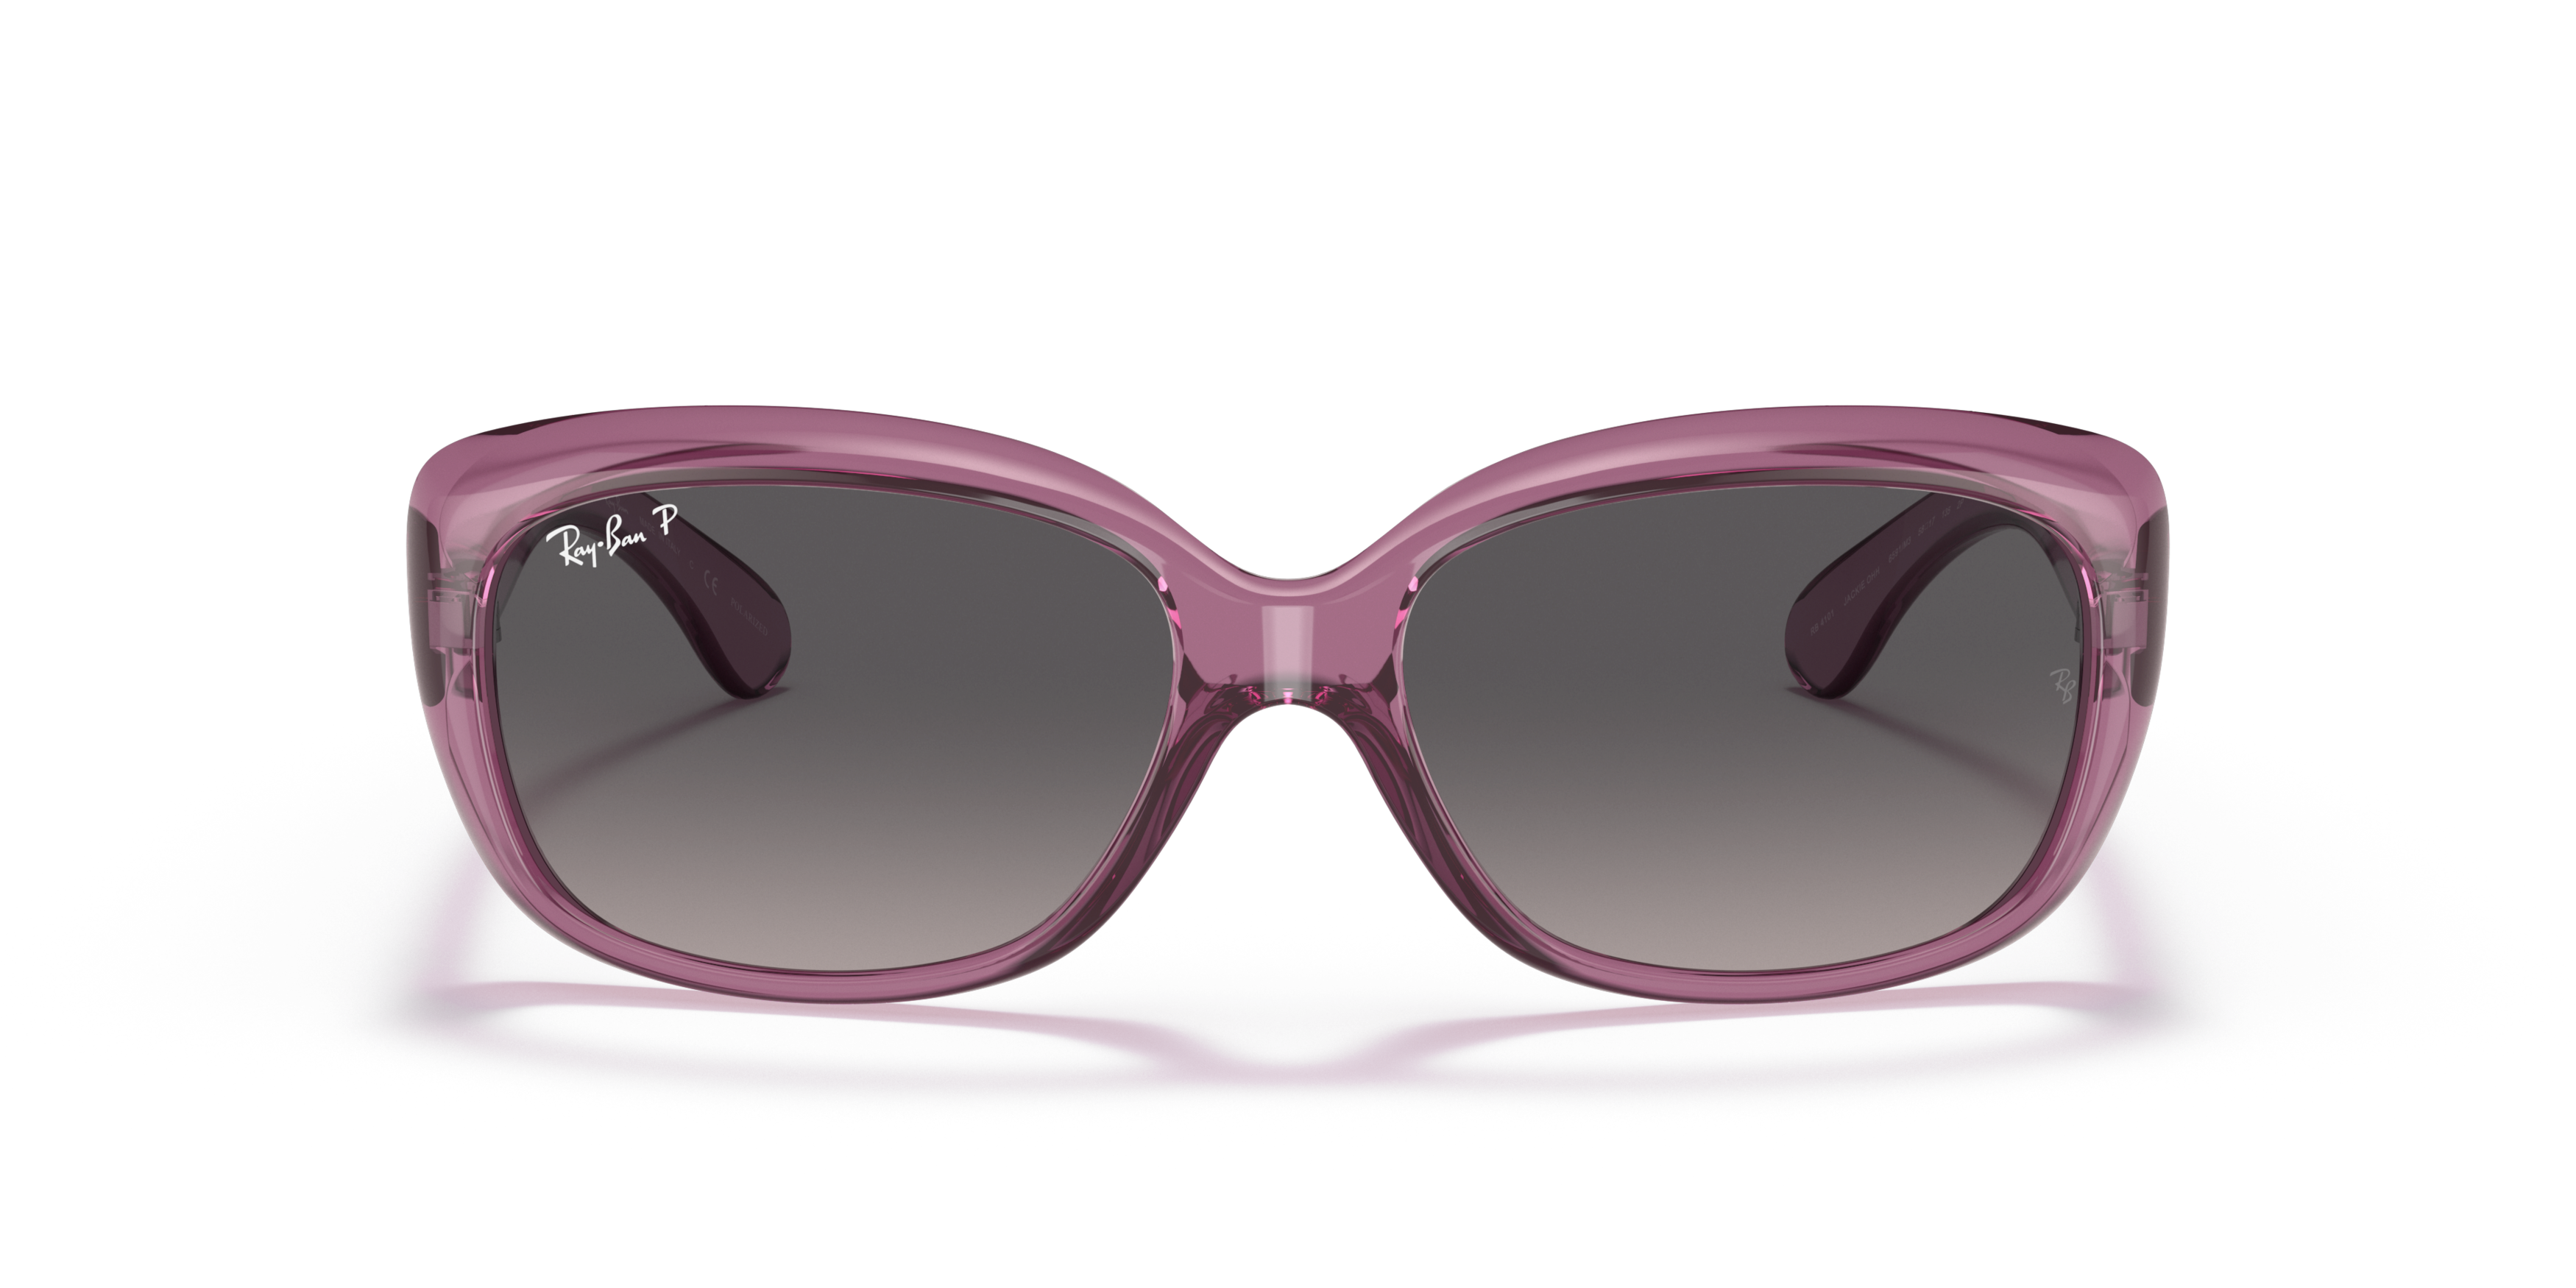 Front Ray-Ban RB 4101 Sunglasses Grey / Transparent, Purple